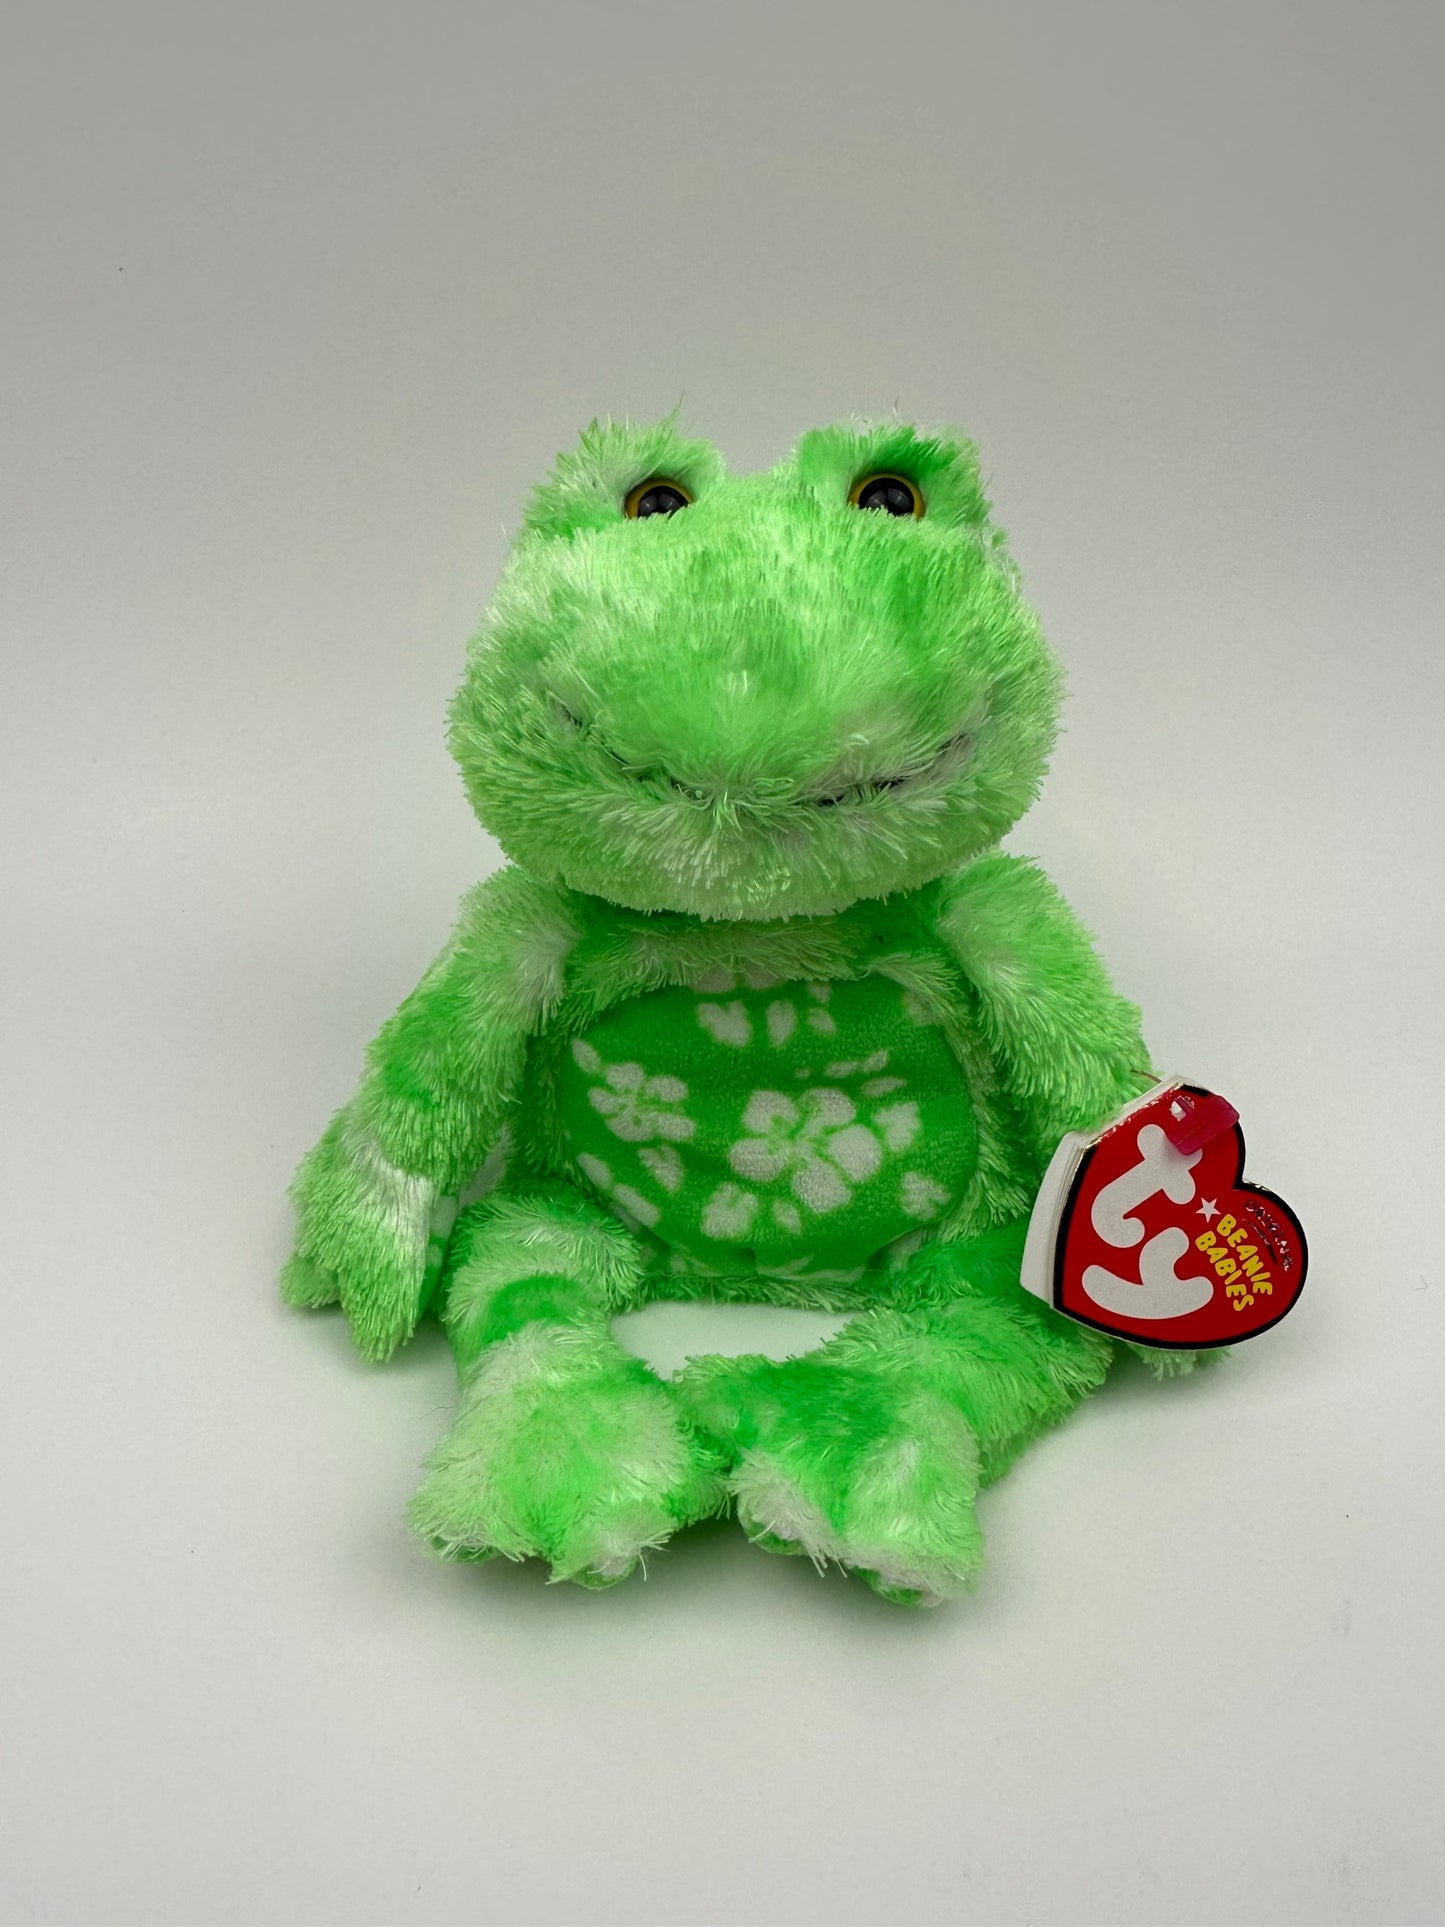 Ty Beanie Baby “Palms” the Frog! (7 inch)